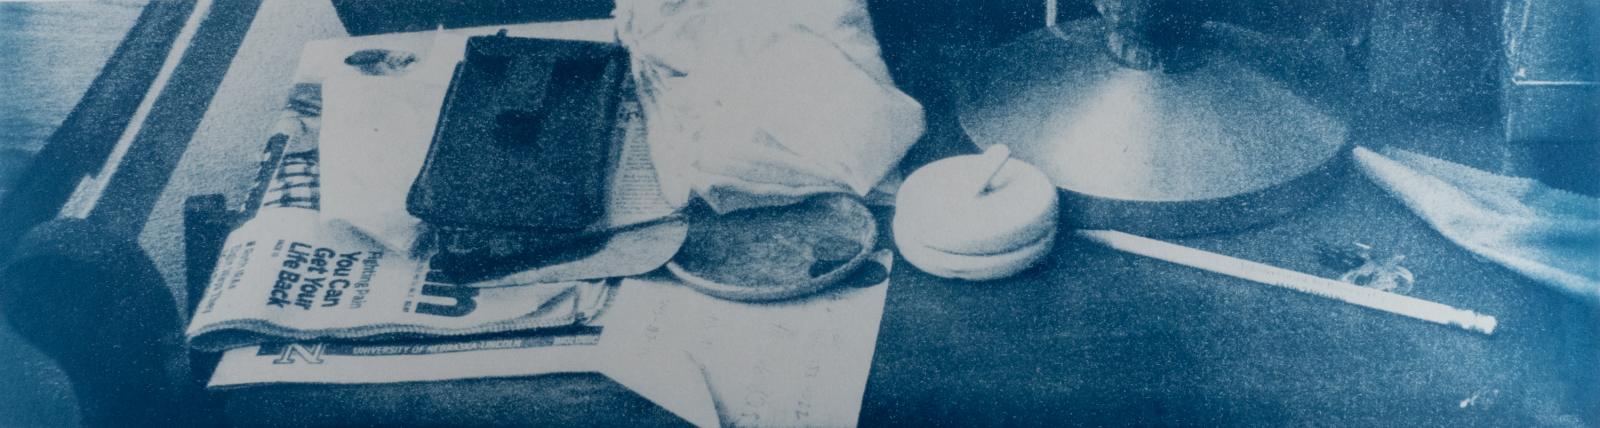 What he left, table, Cyanotype photograph